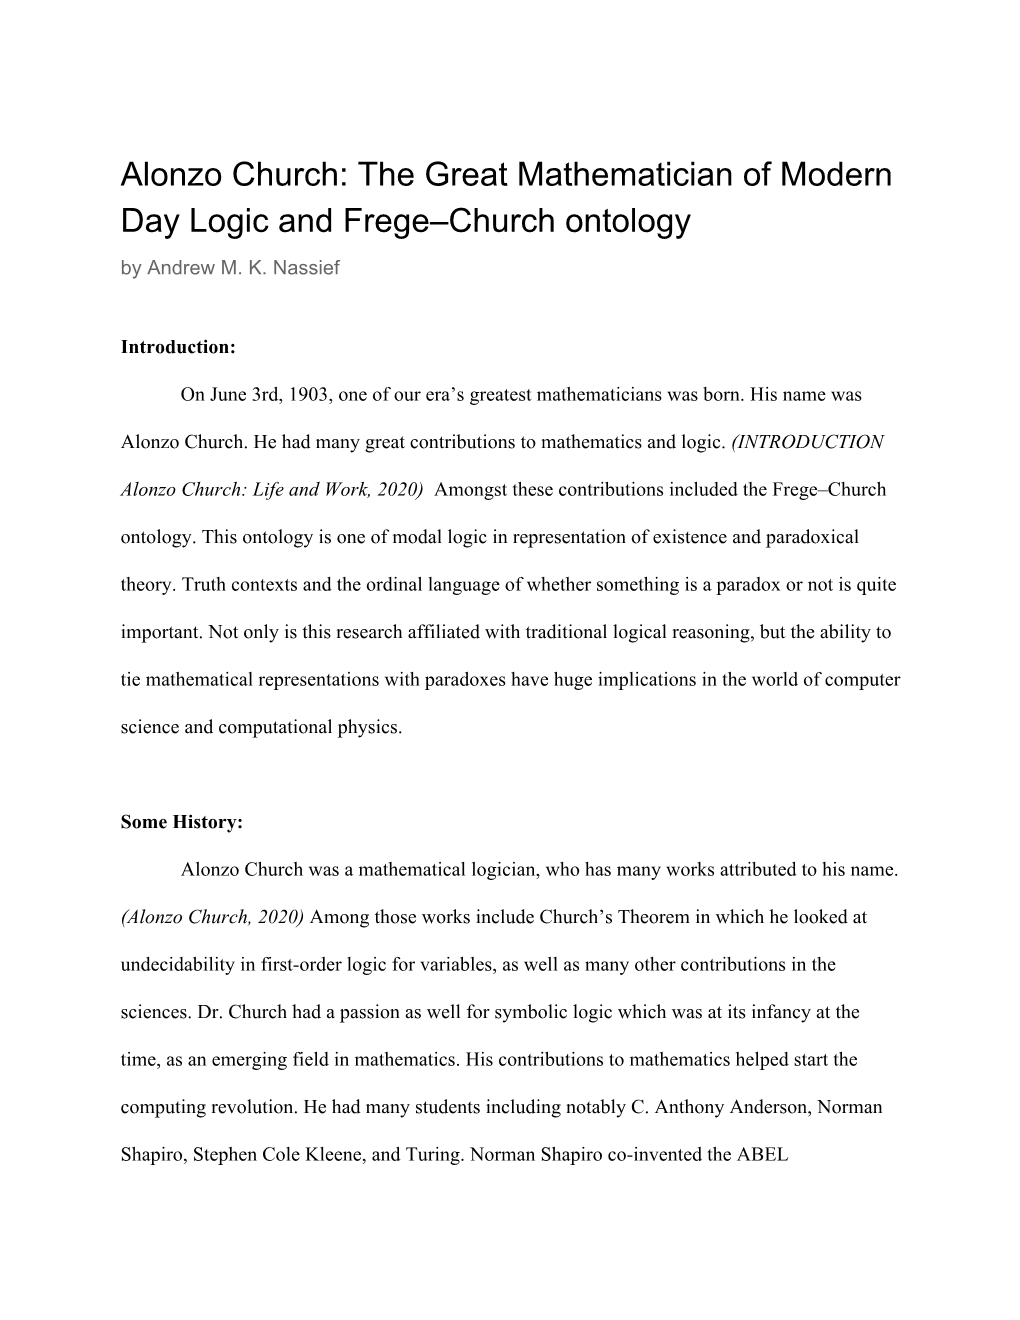 Alonzo Church: the Great Mathematician of Modern Day Logic and Frege–Church Ontology by Andrew M